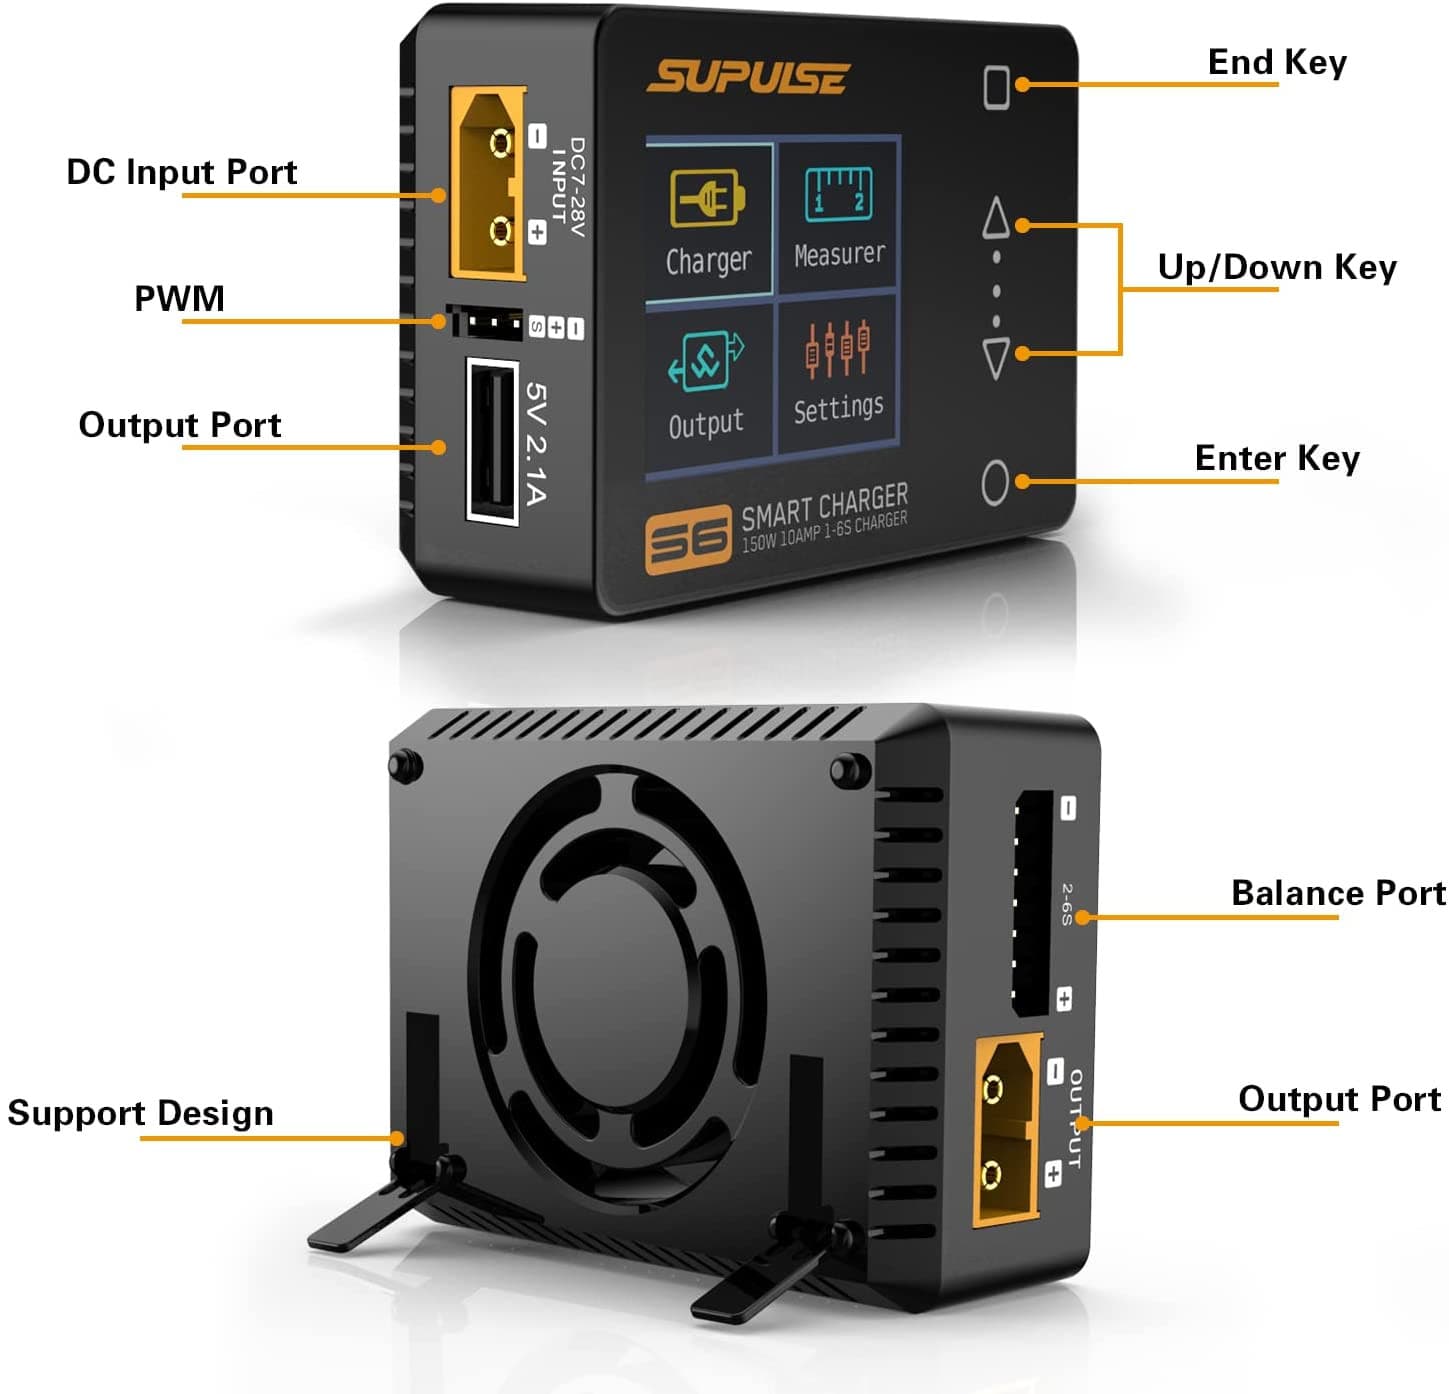 SUPULSE S6 150W 10A Balance Charger for 1-6S Batteries